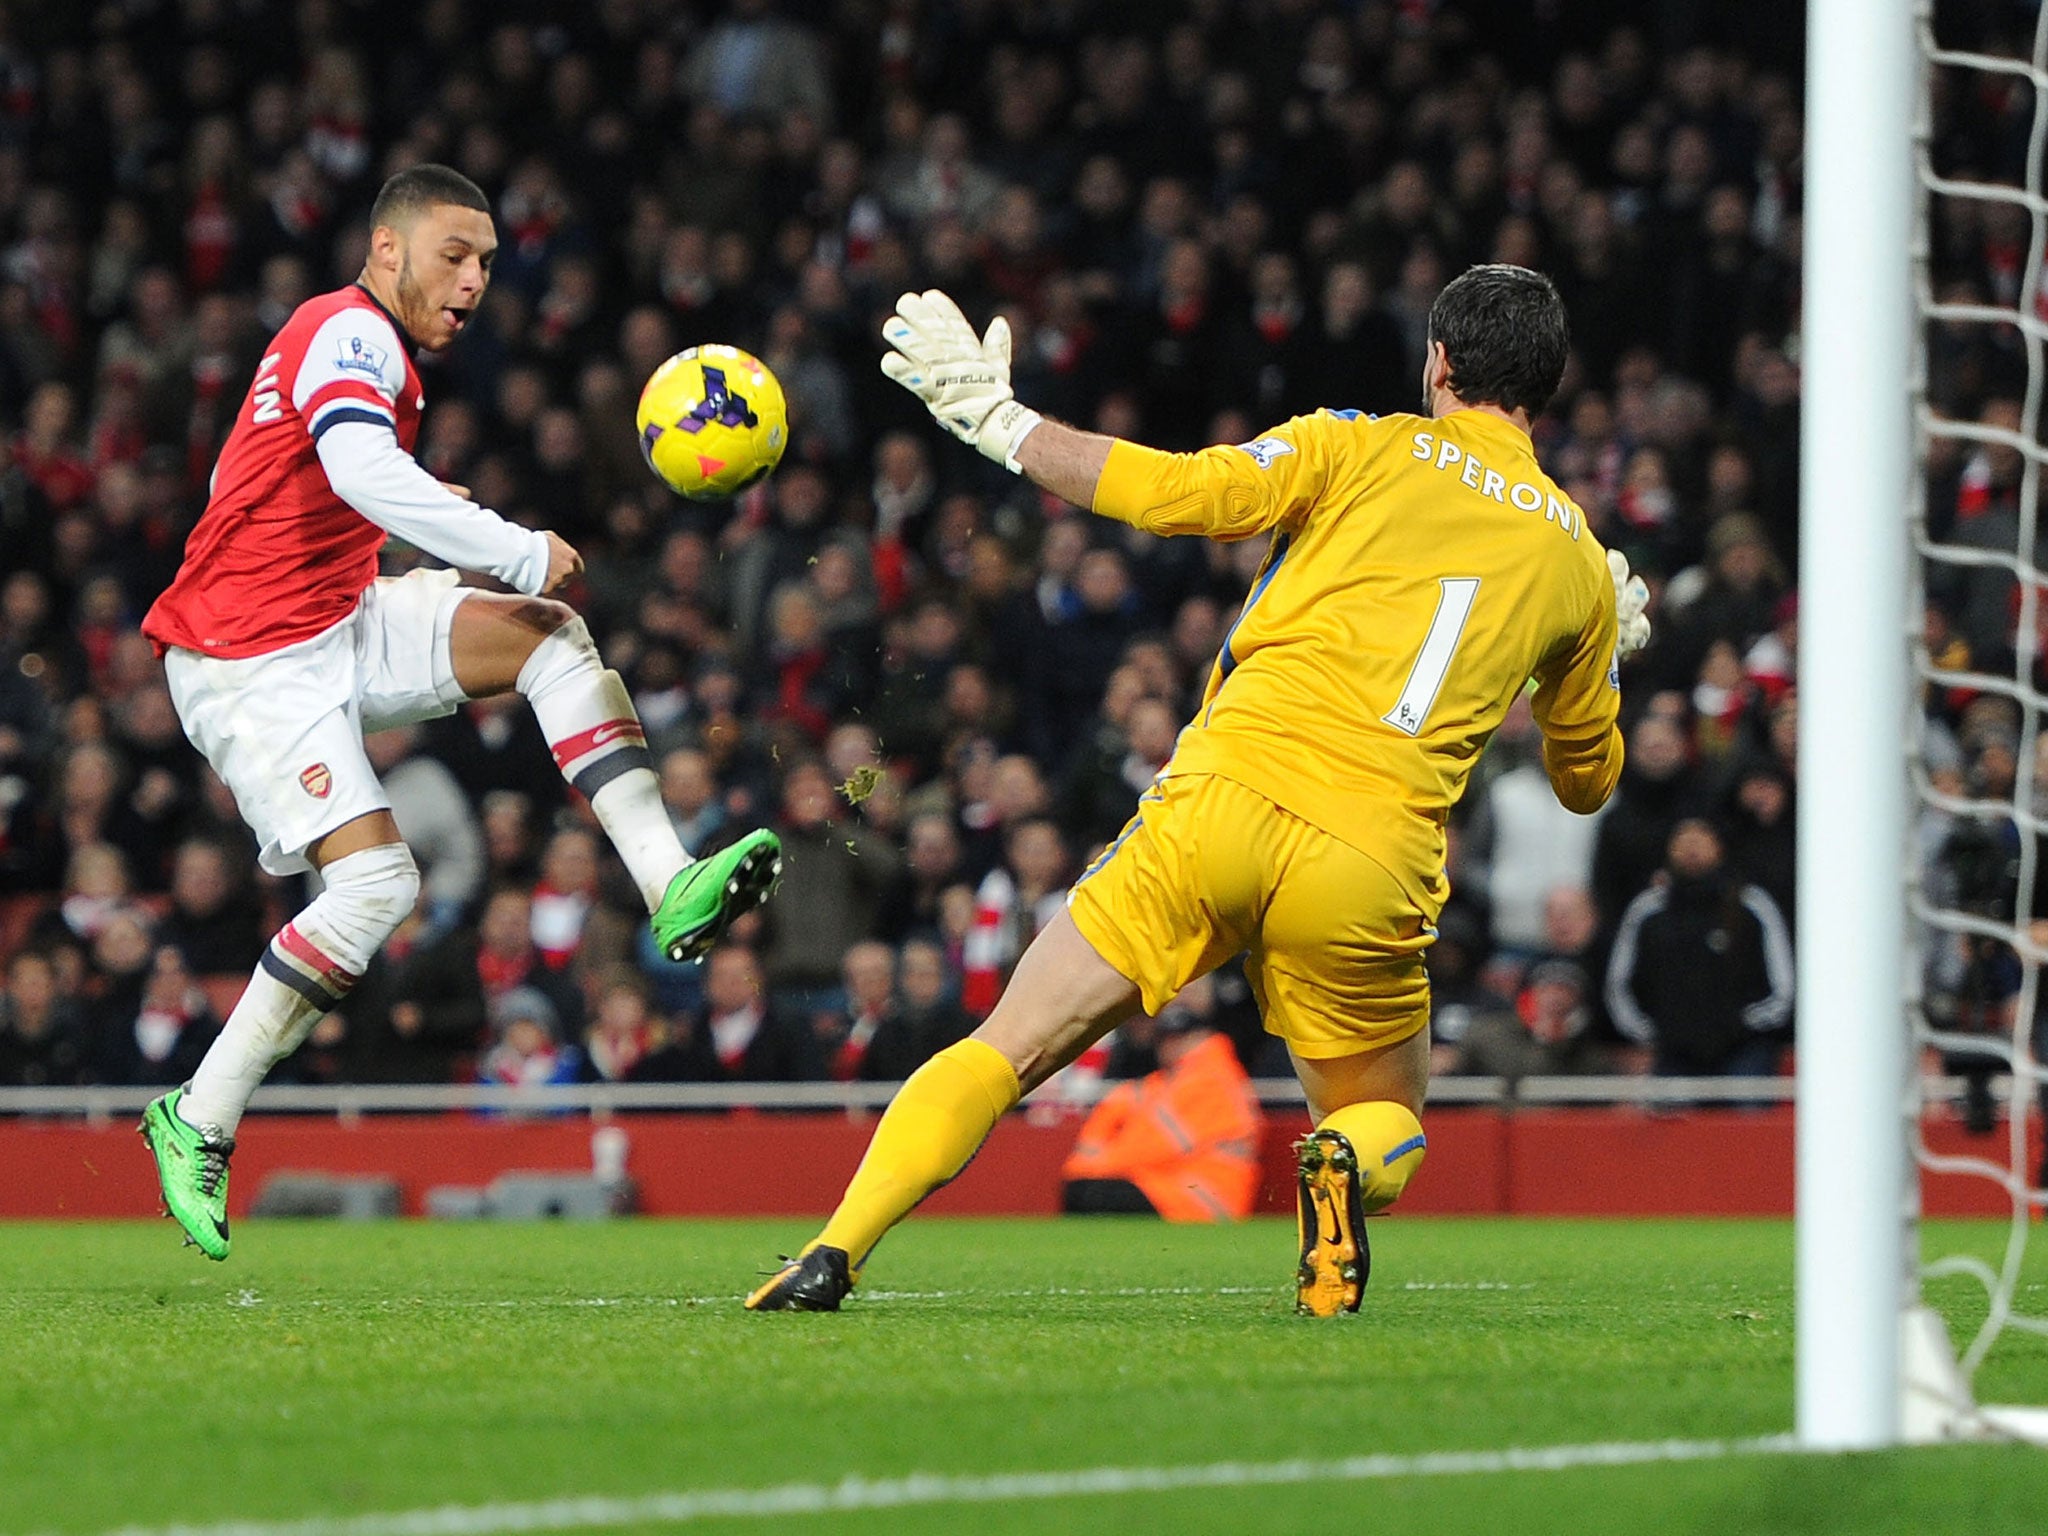 Alex Oxlade-Chamberlain opens the scoring for Arsenal in their 2-0 win over Crystal Palace